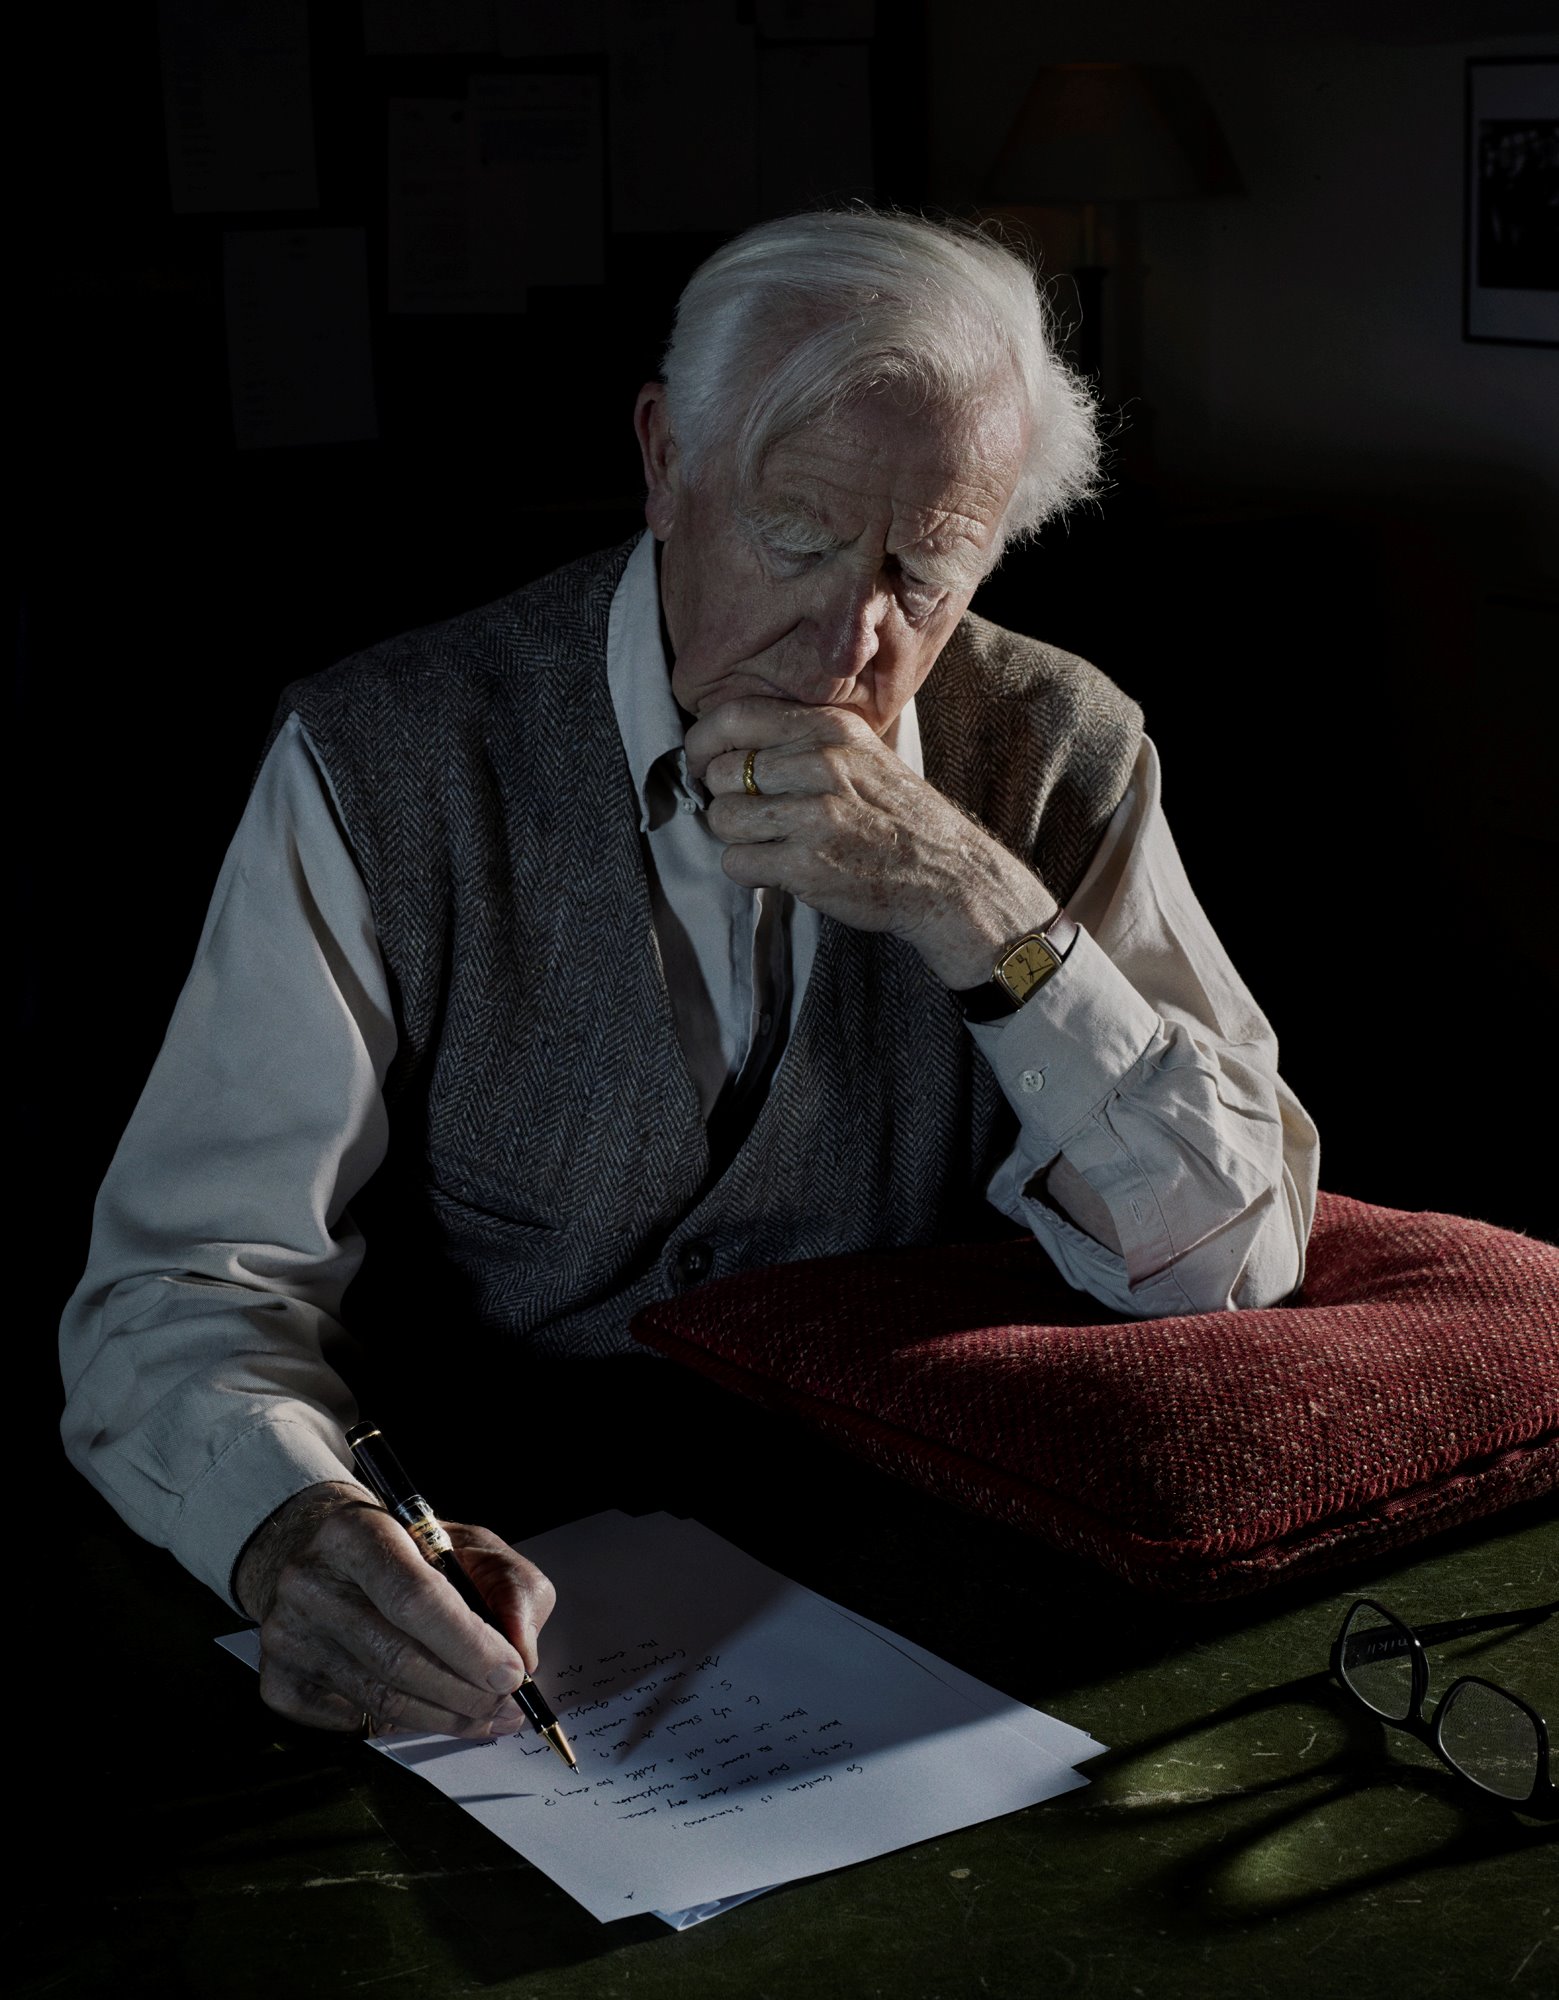 Happy Birthday to John Le Carré. The Little Drummer Girl starts airing soon on the BBC. Portrait by 